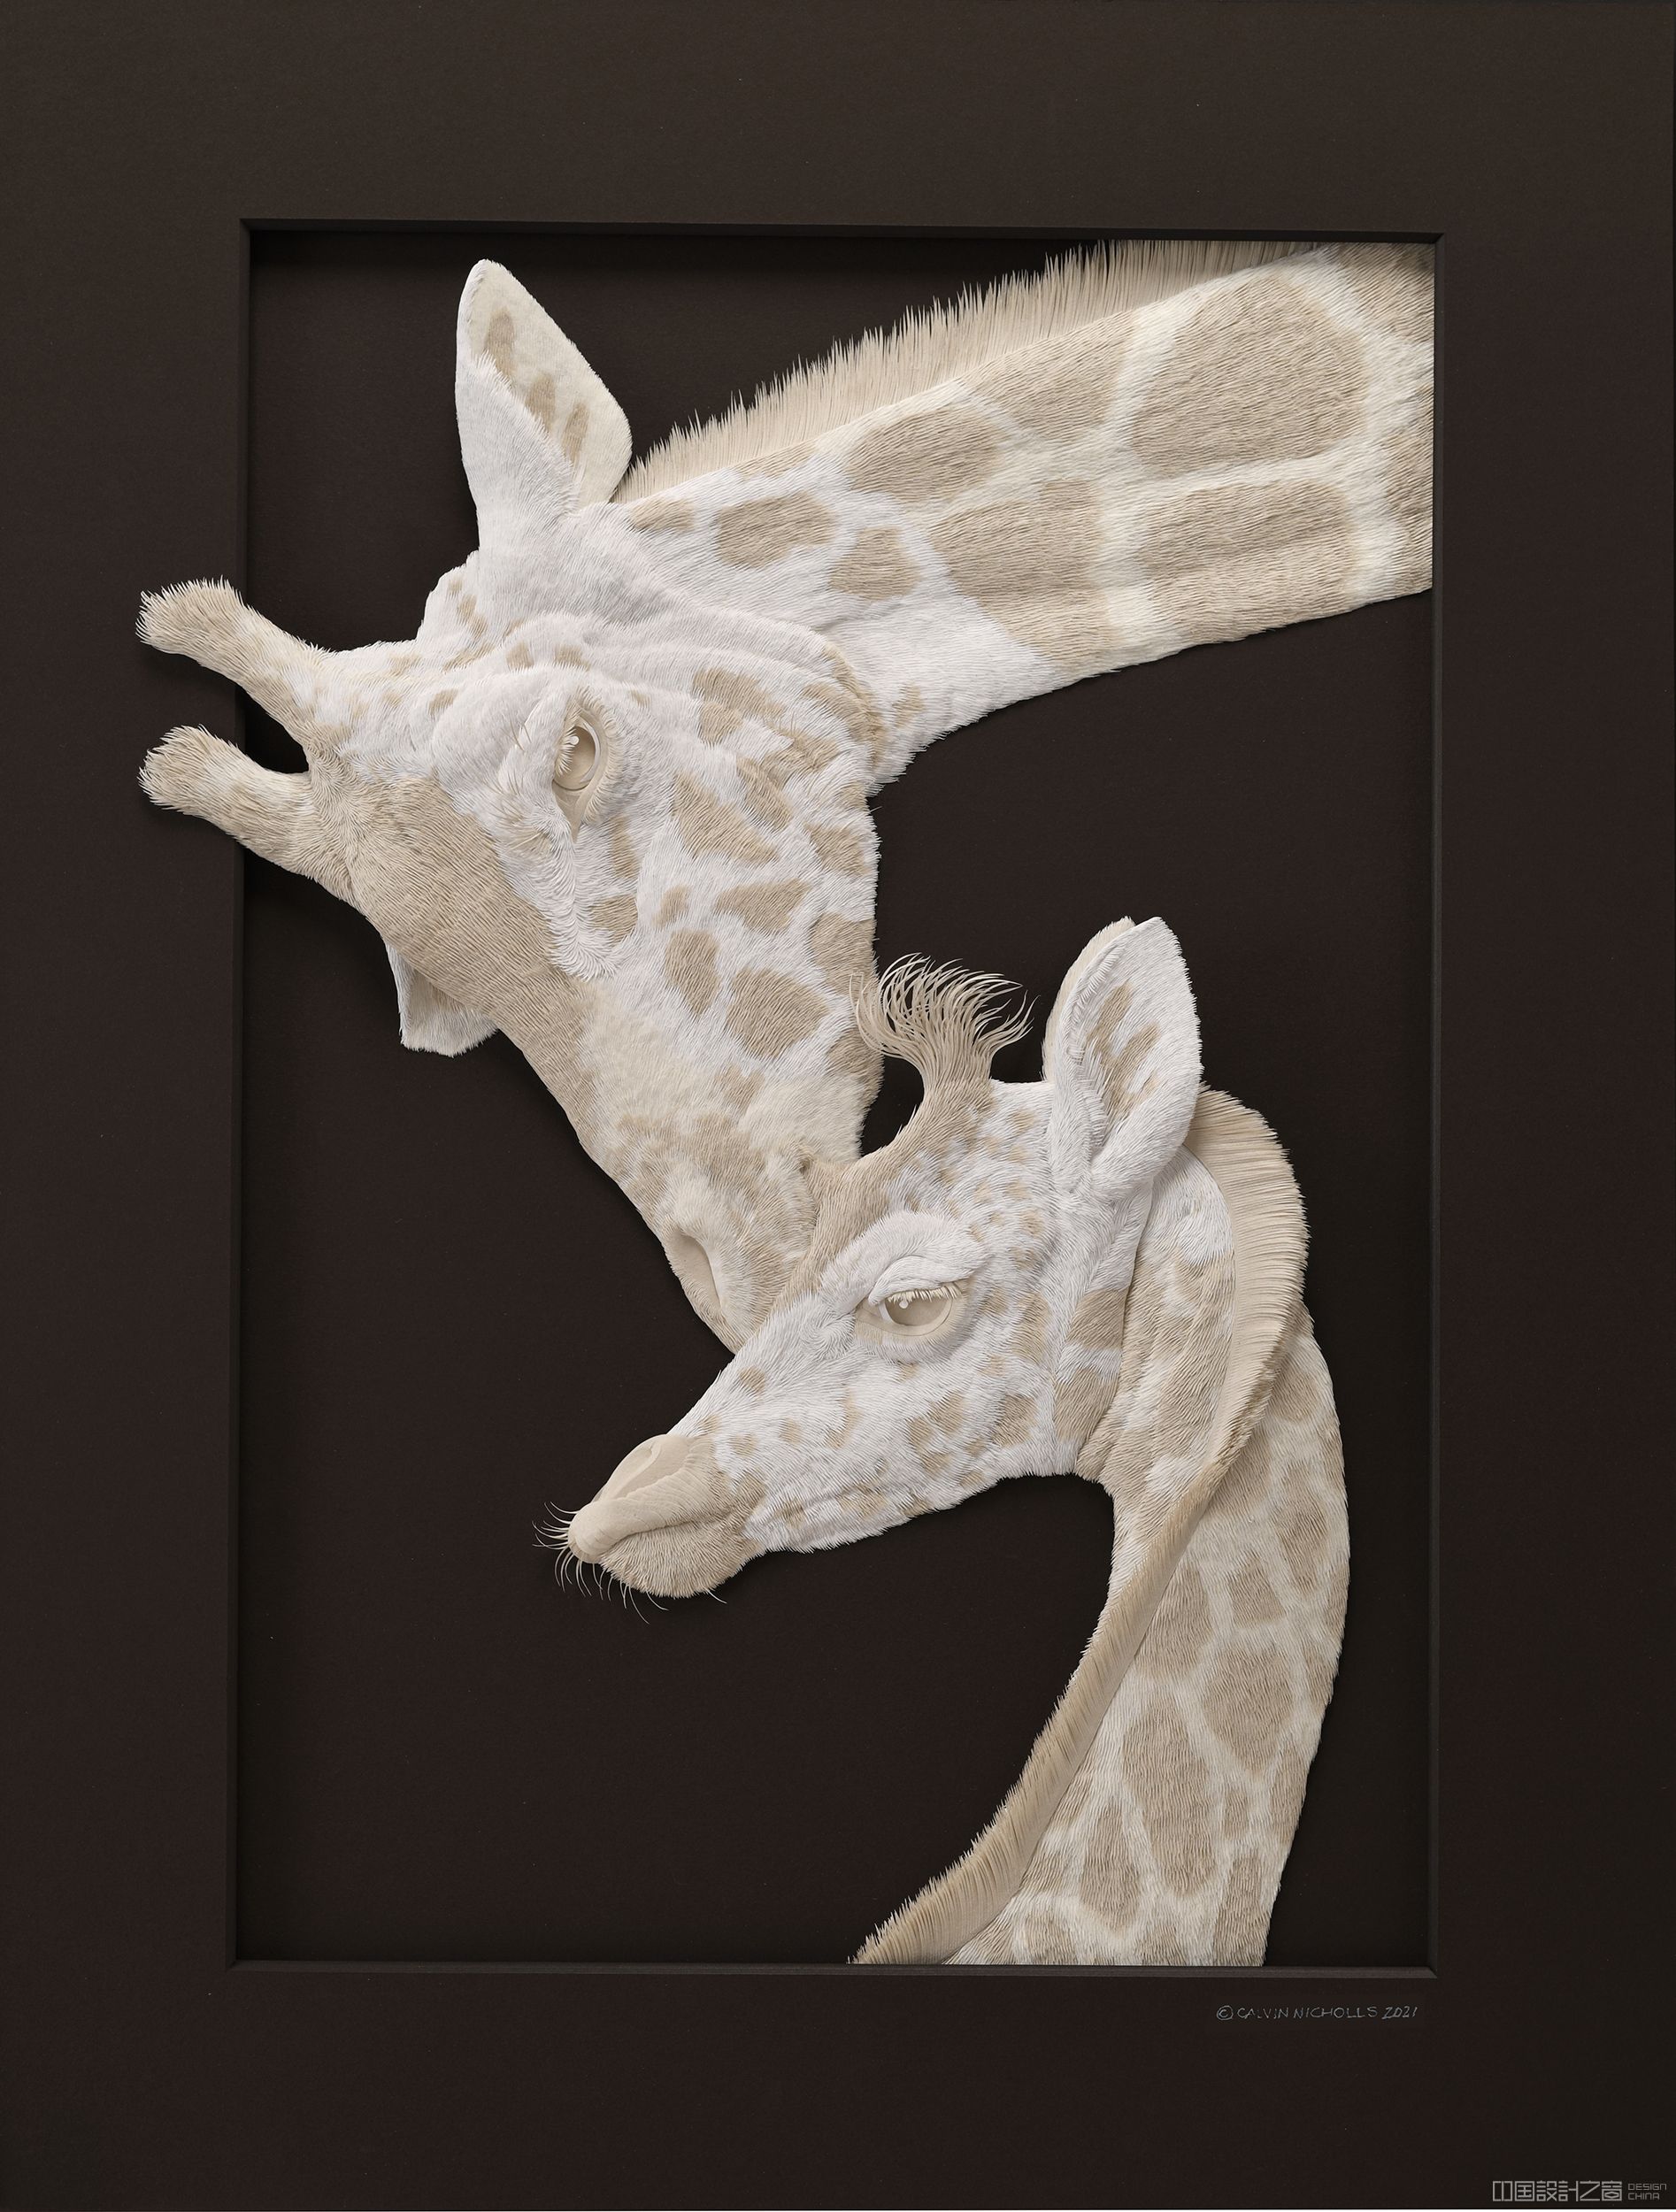 A sculpture of two giraffes made from paper.